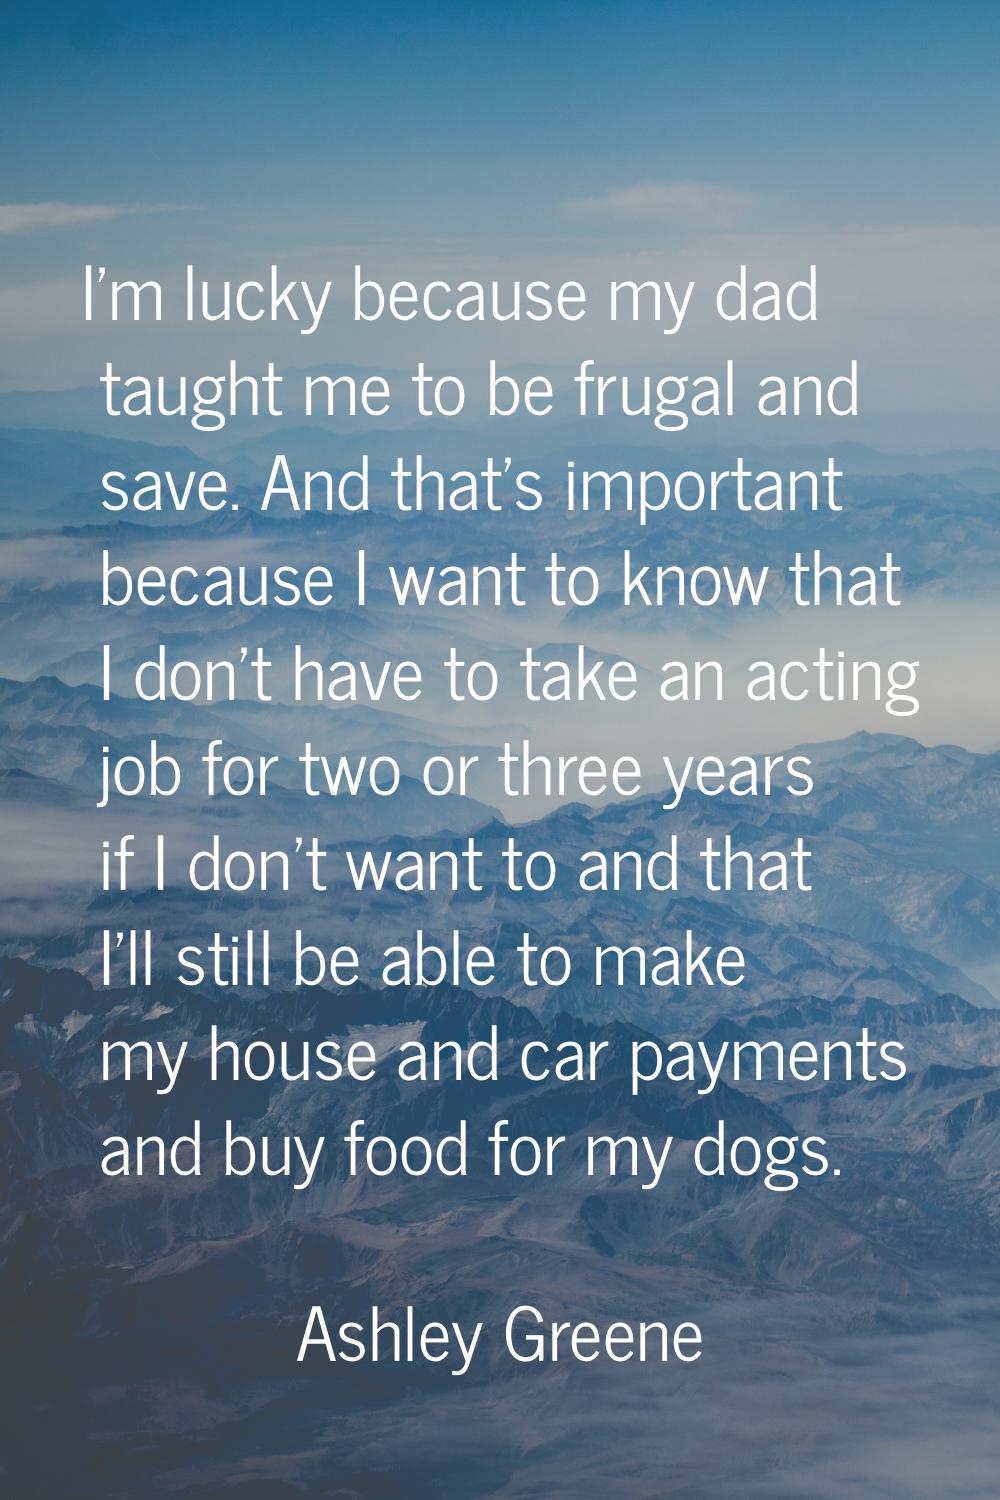 I'm lucky because my dad taught me to be frugal and save. And that's important because I want to kn